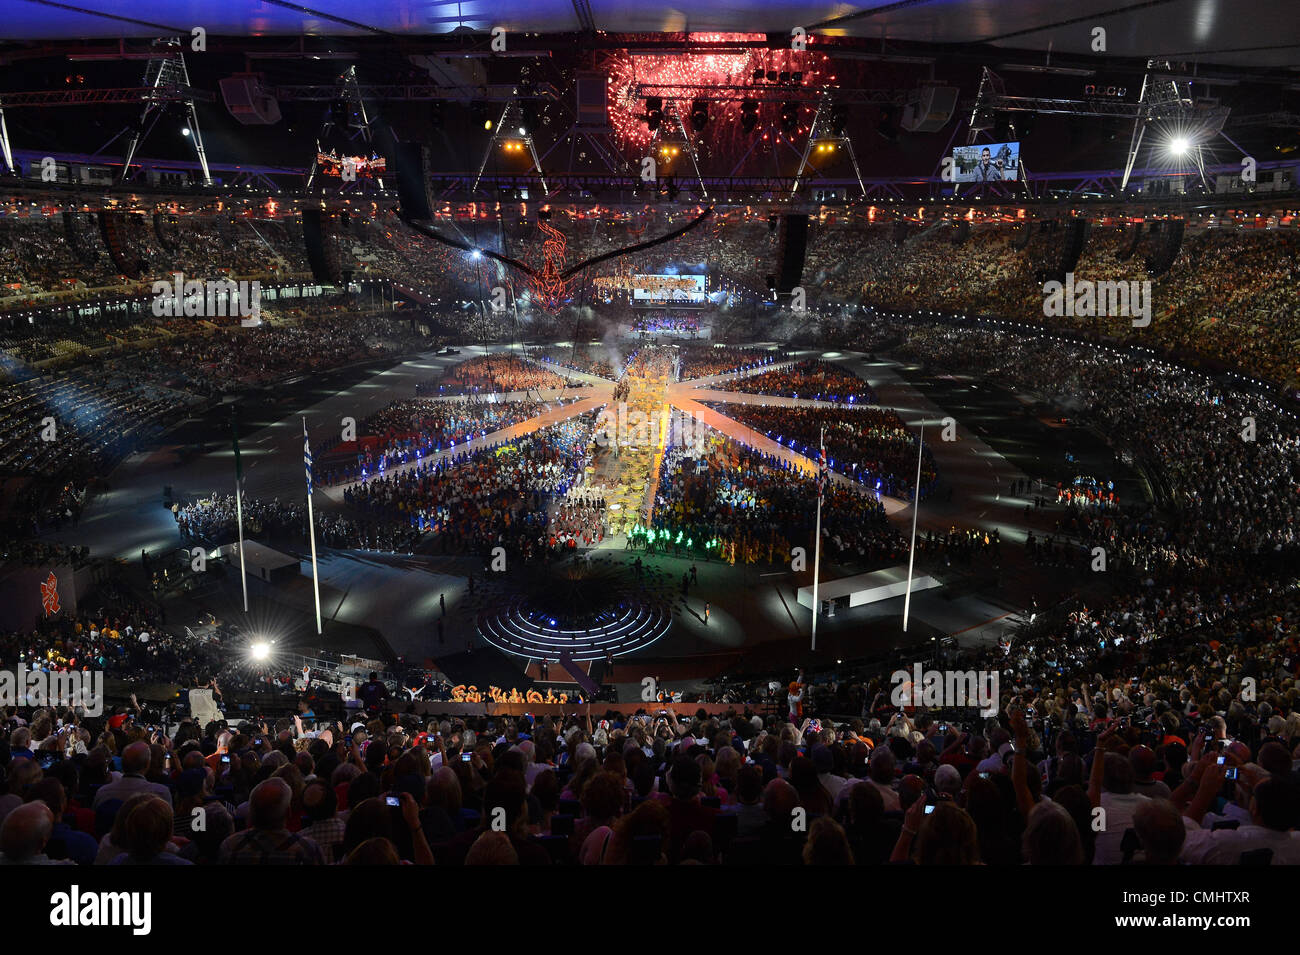 LONDON, ENGLAND - AUGUST 12, a general view during the closing ceremony of the London 2012 Olympic Games at the Olympic Park stadium, on August 12, 2012 in London, England Photo by Roger Sedres / Gallo Images Stock Photo